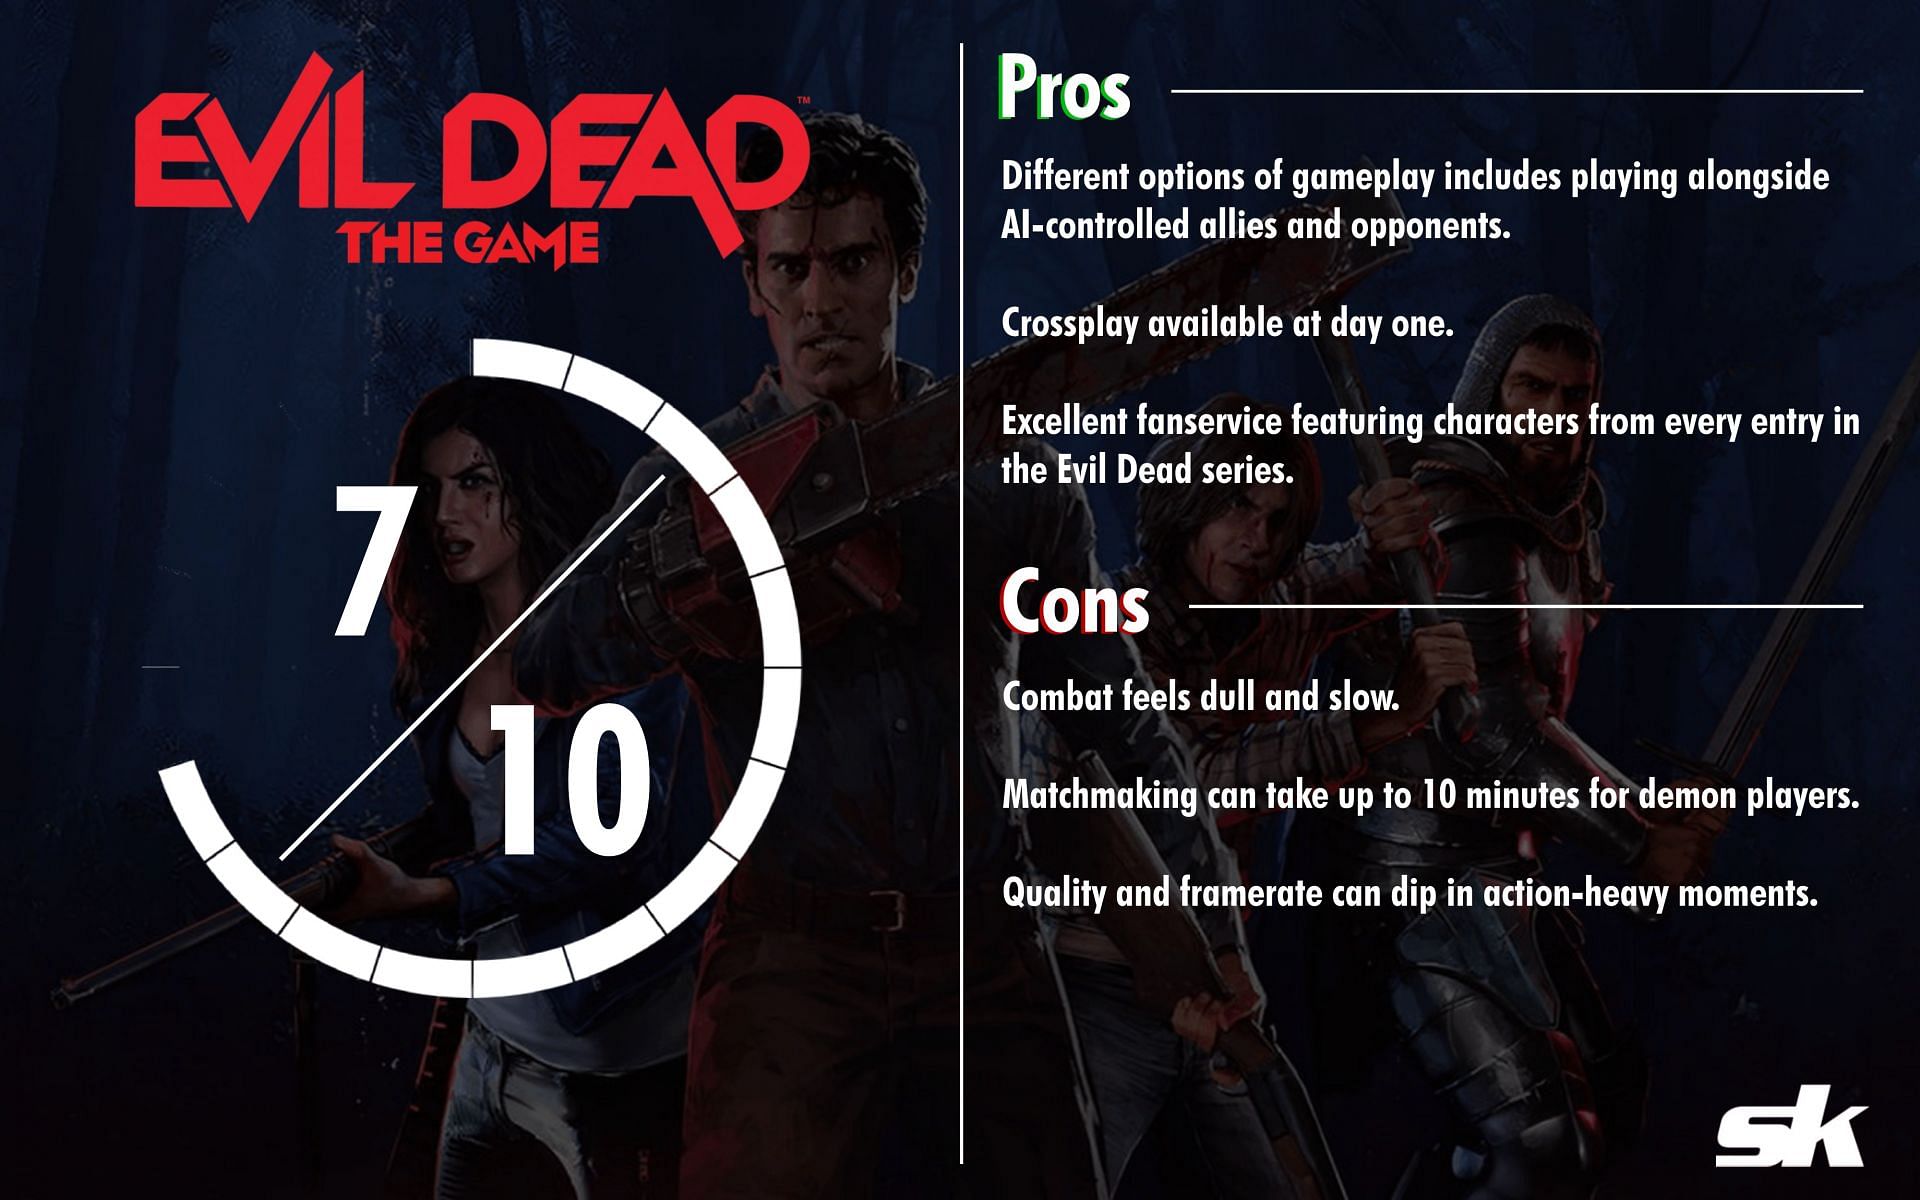 Final thoughts on Evil Dead: The Game (Image via Sportskeeda)